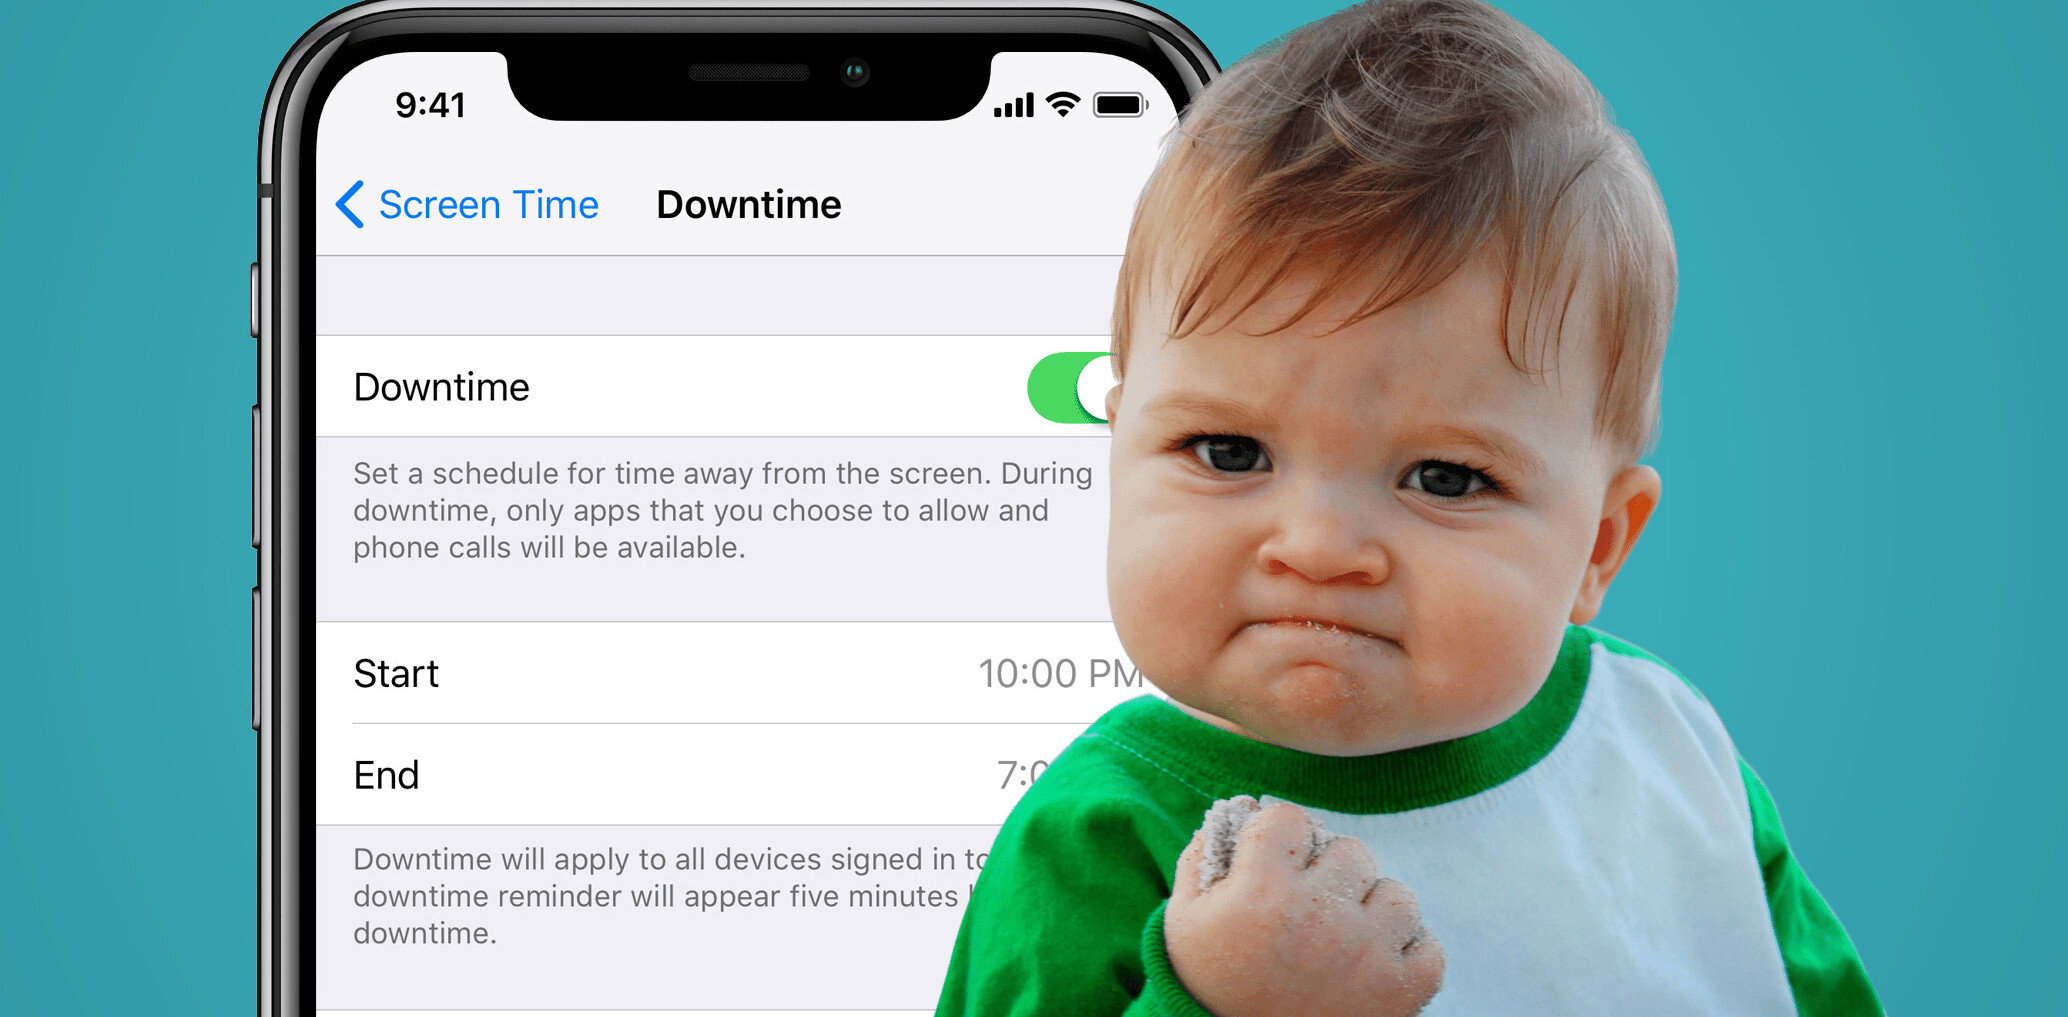 Crafty kids are finding ingenious ways to thwart Apple’s ‘Screen Time’ feature